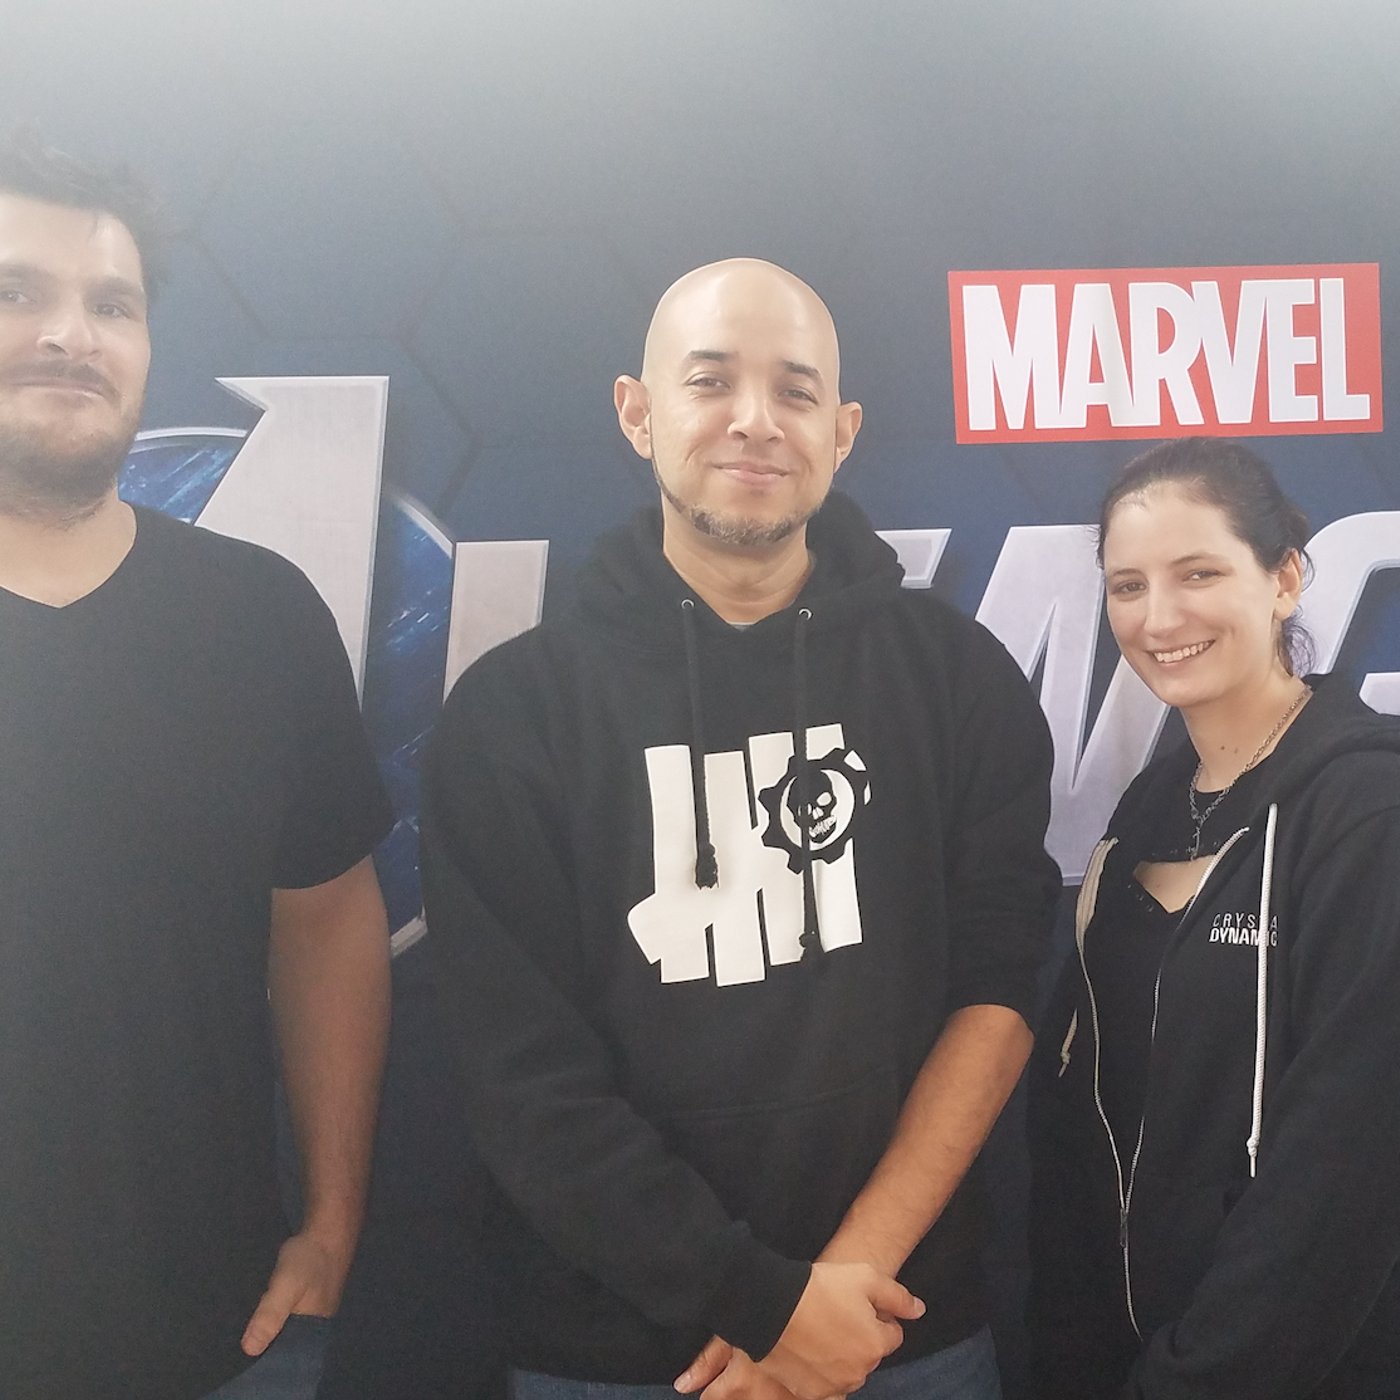 S14 Ep969: NYCC 2019: Marvel’s Avengers Interview